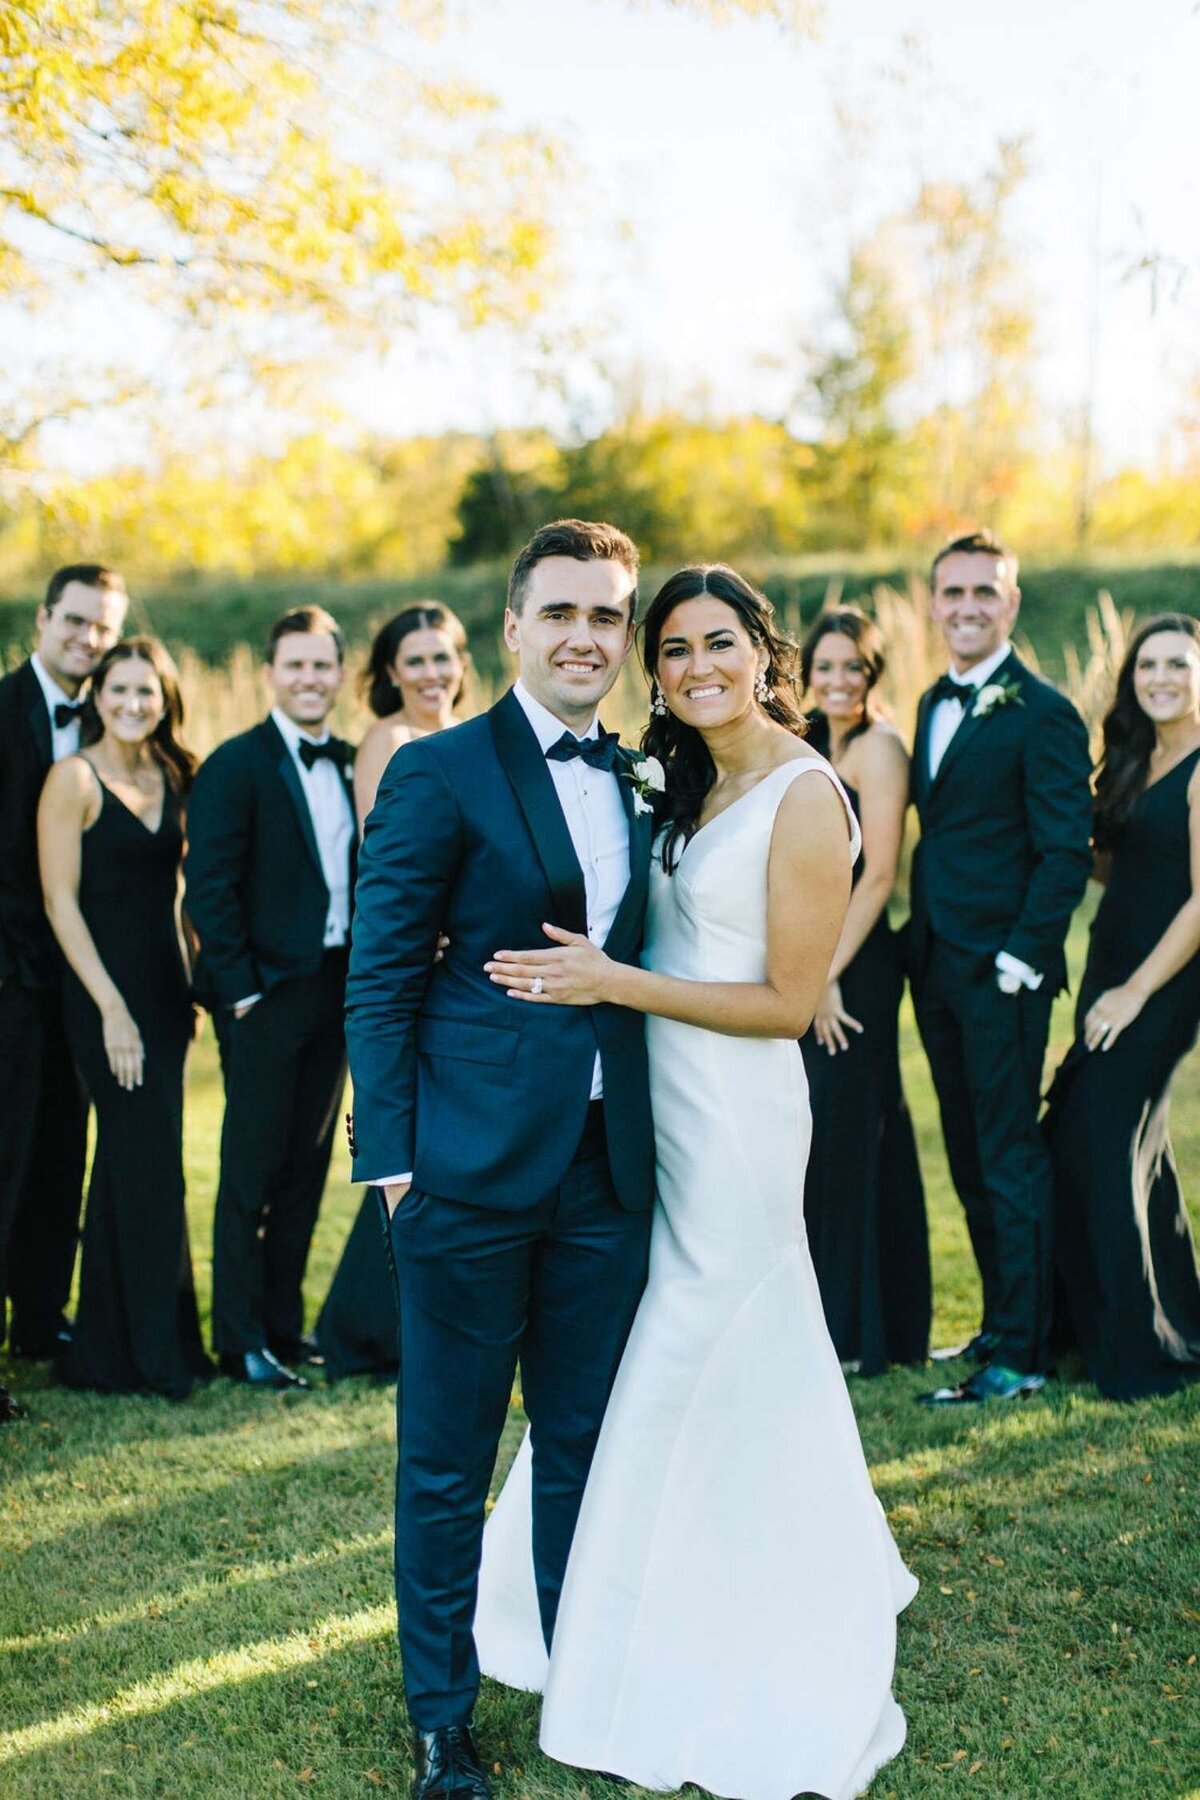 Timesless and Elegant Wedding Party take Fall Portraits for a Luxury Michigan Lakefront Golf Club Wedding.